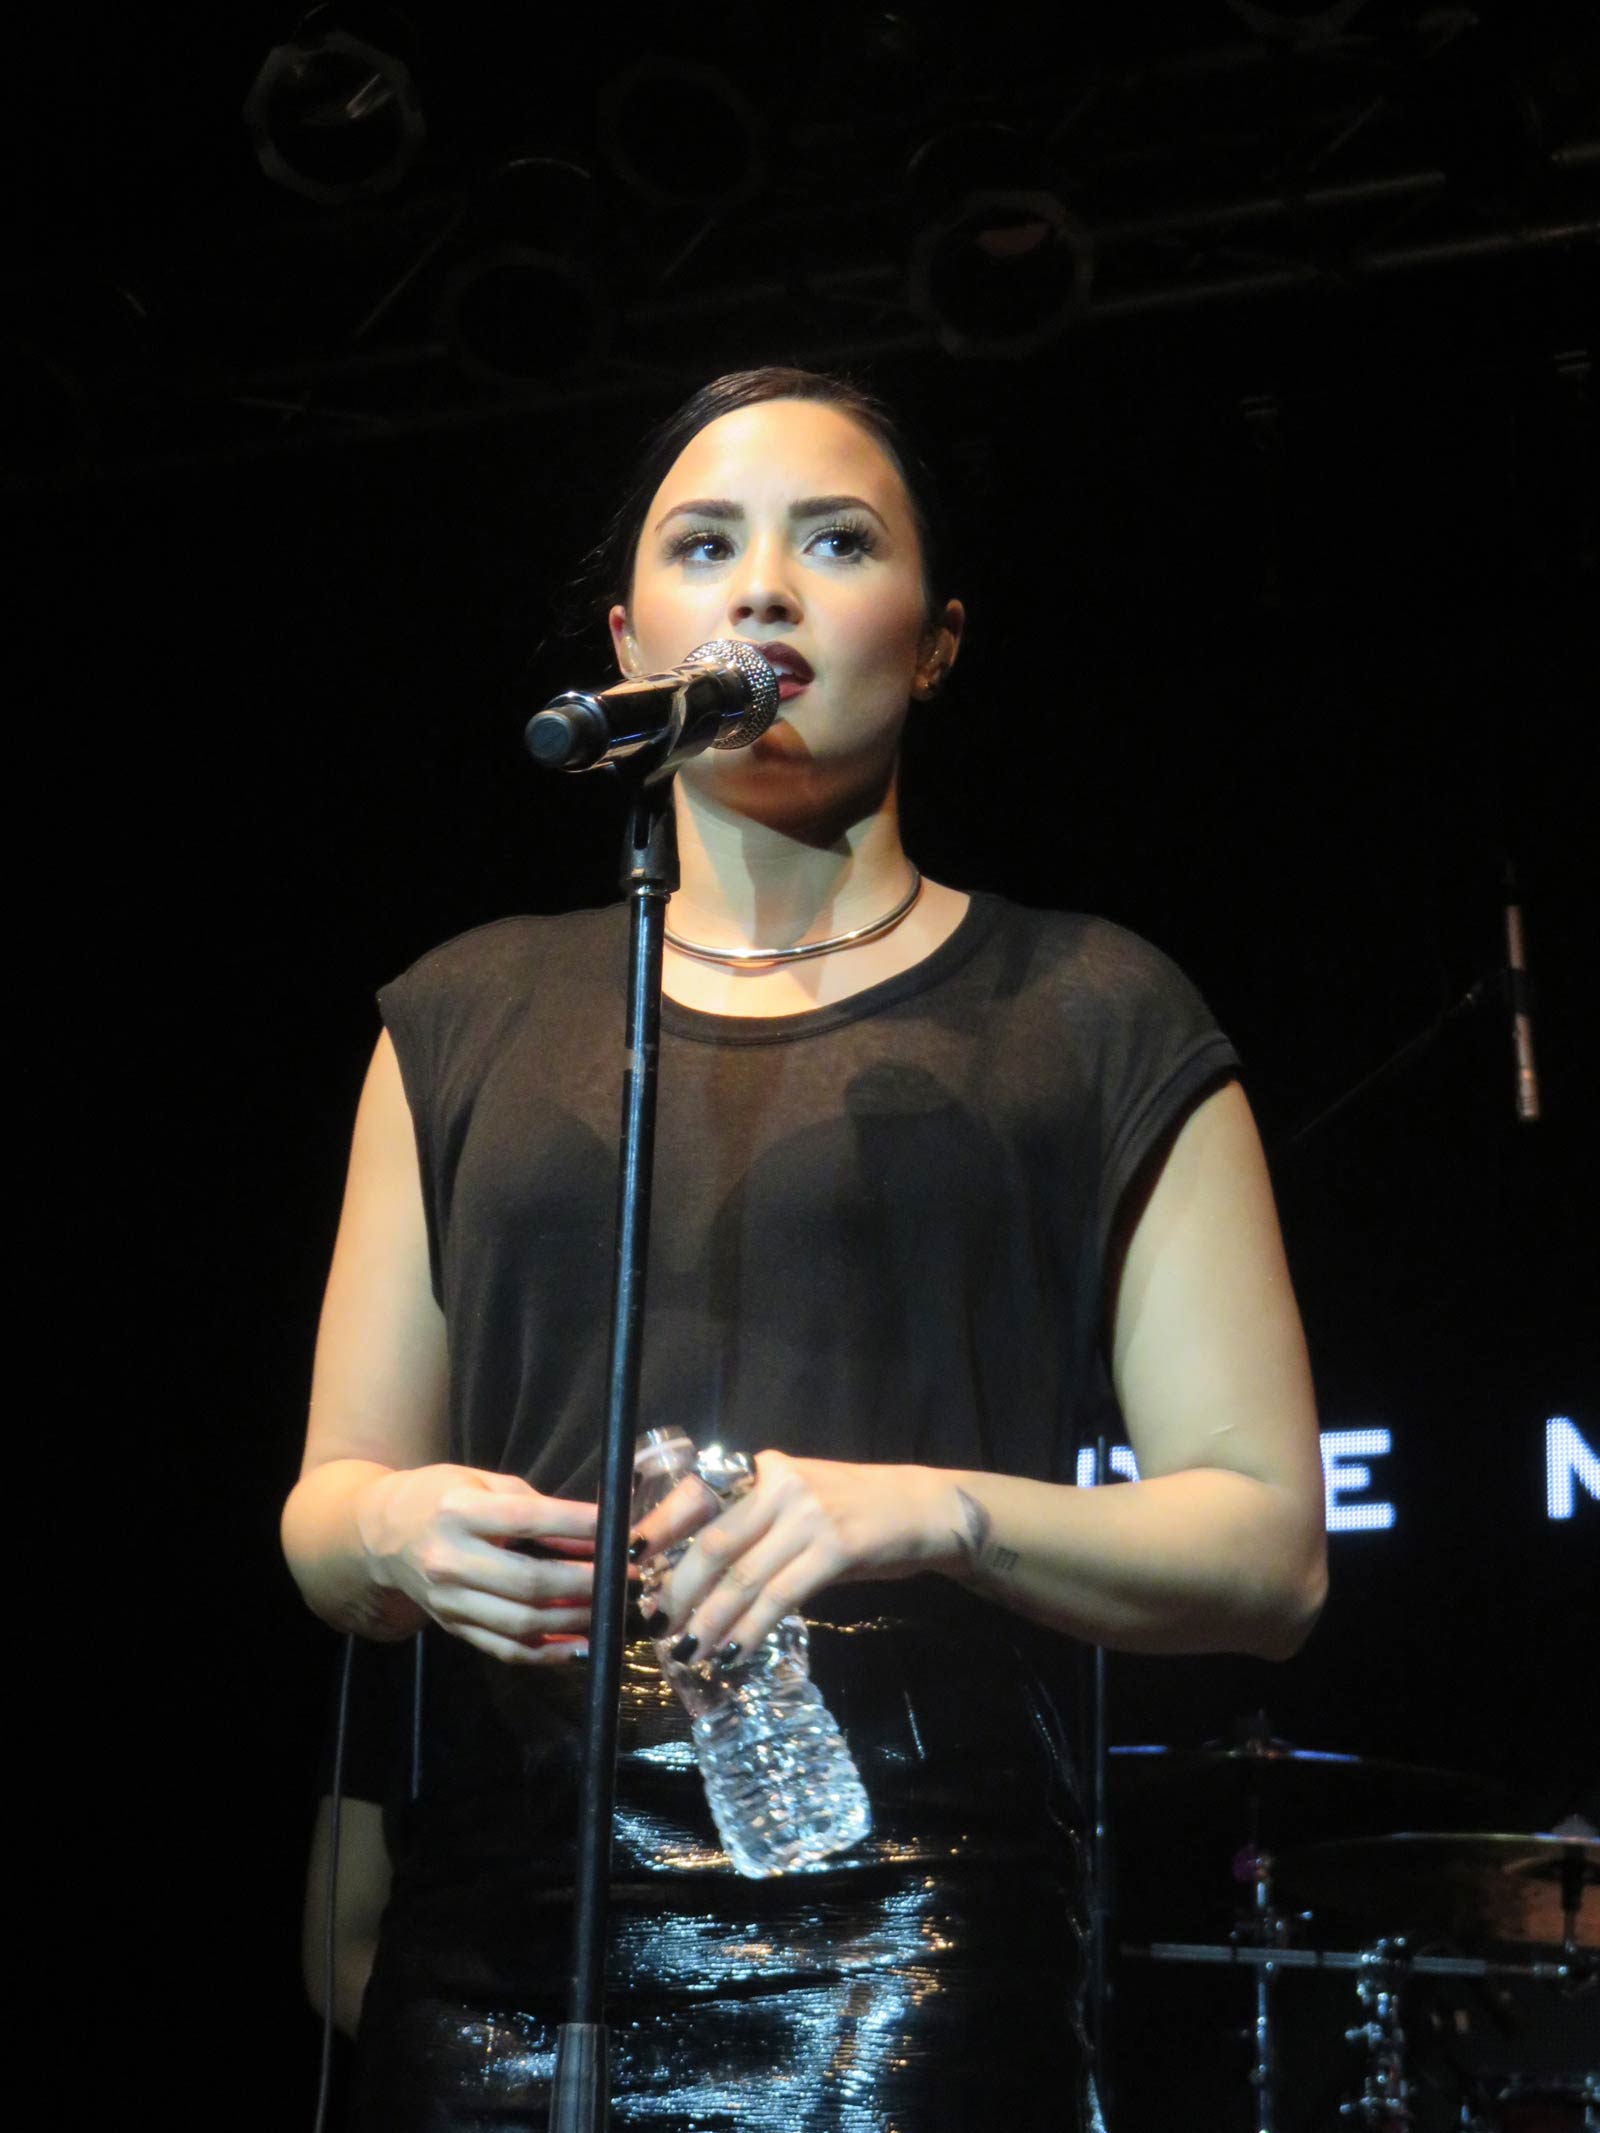 Demi Lovato performs at Music is Universal event